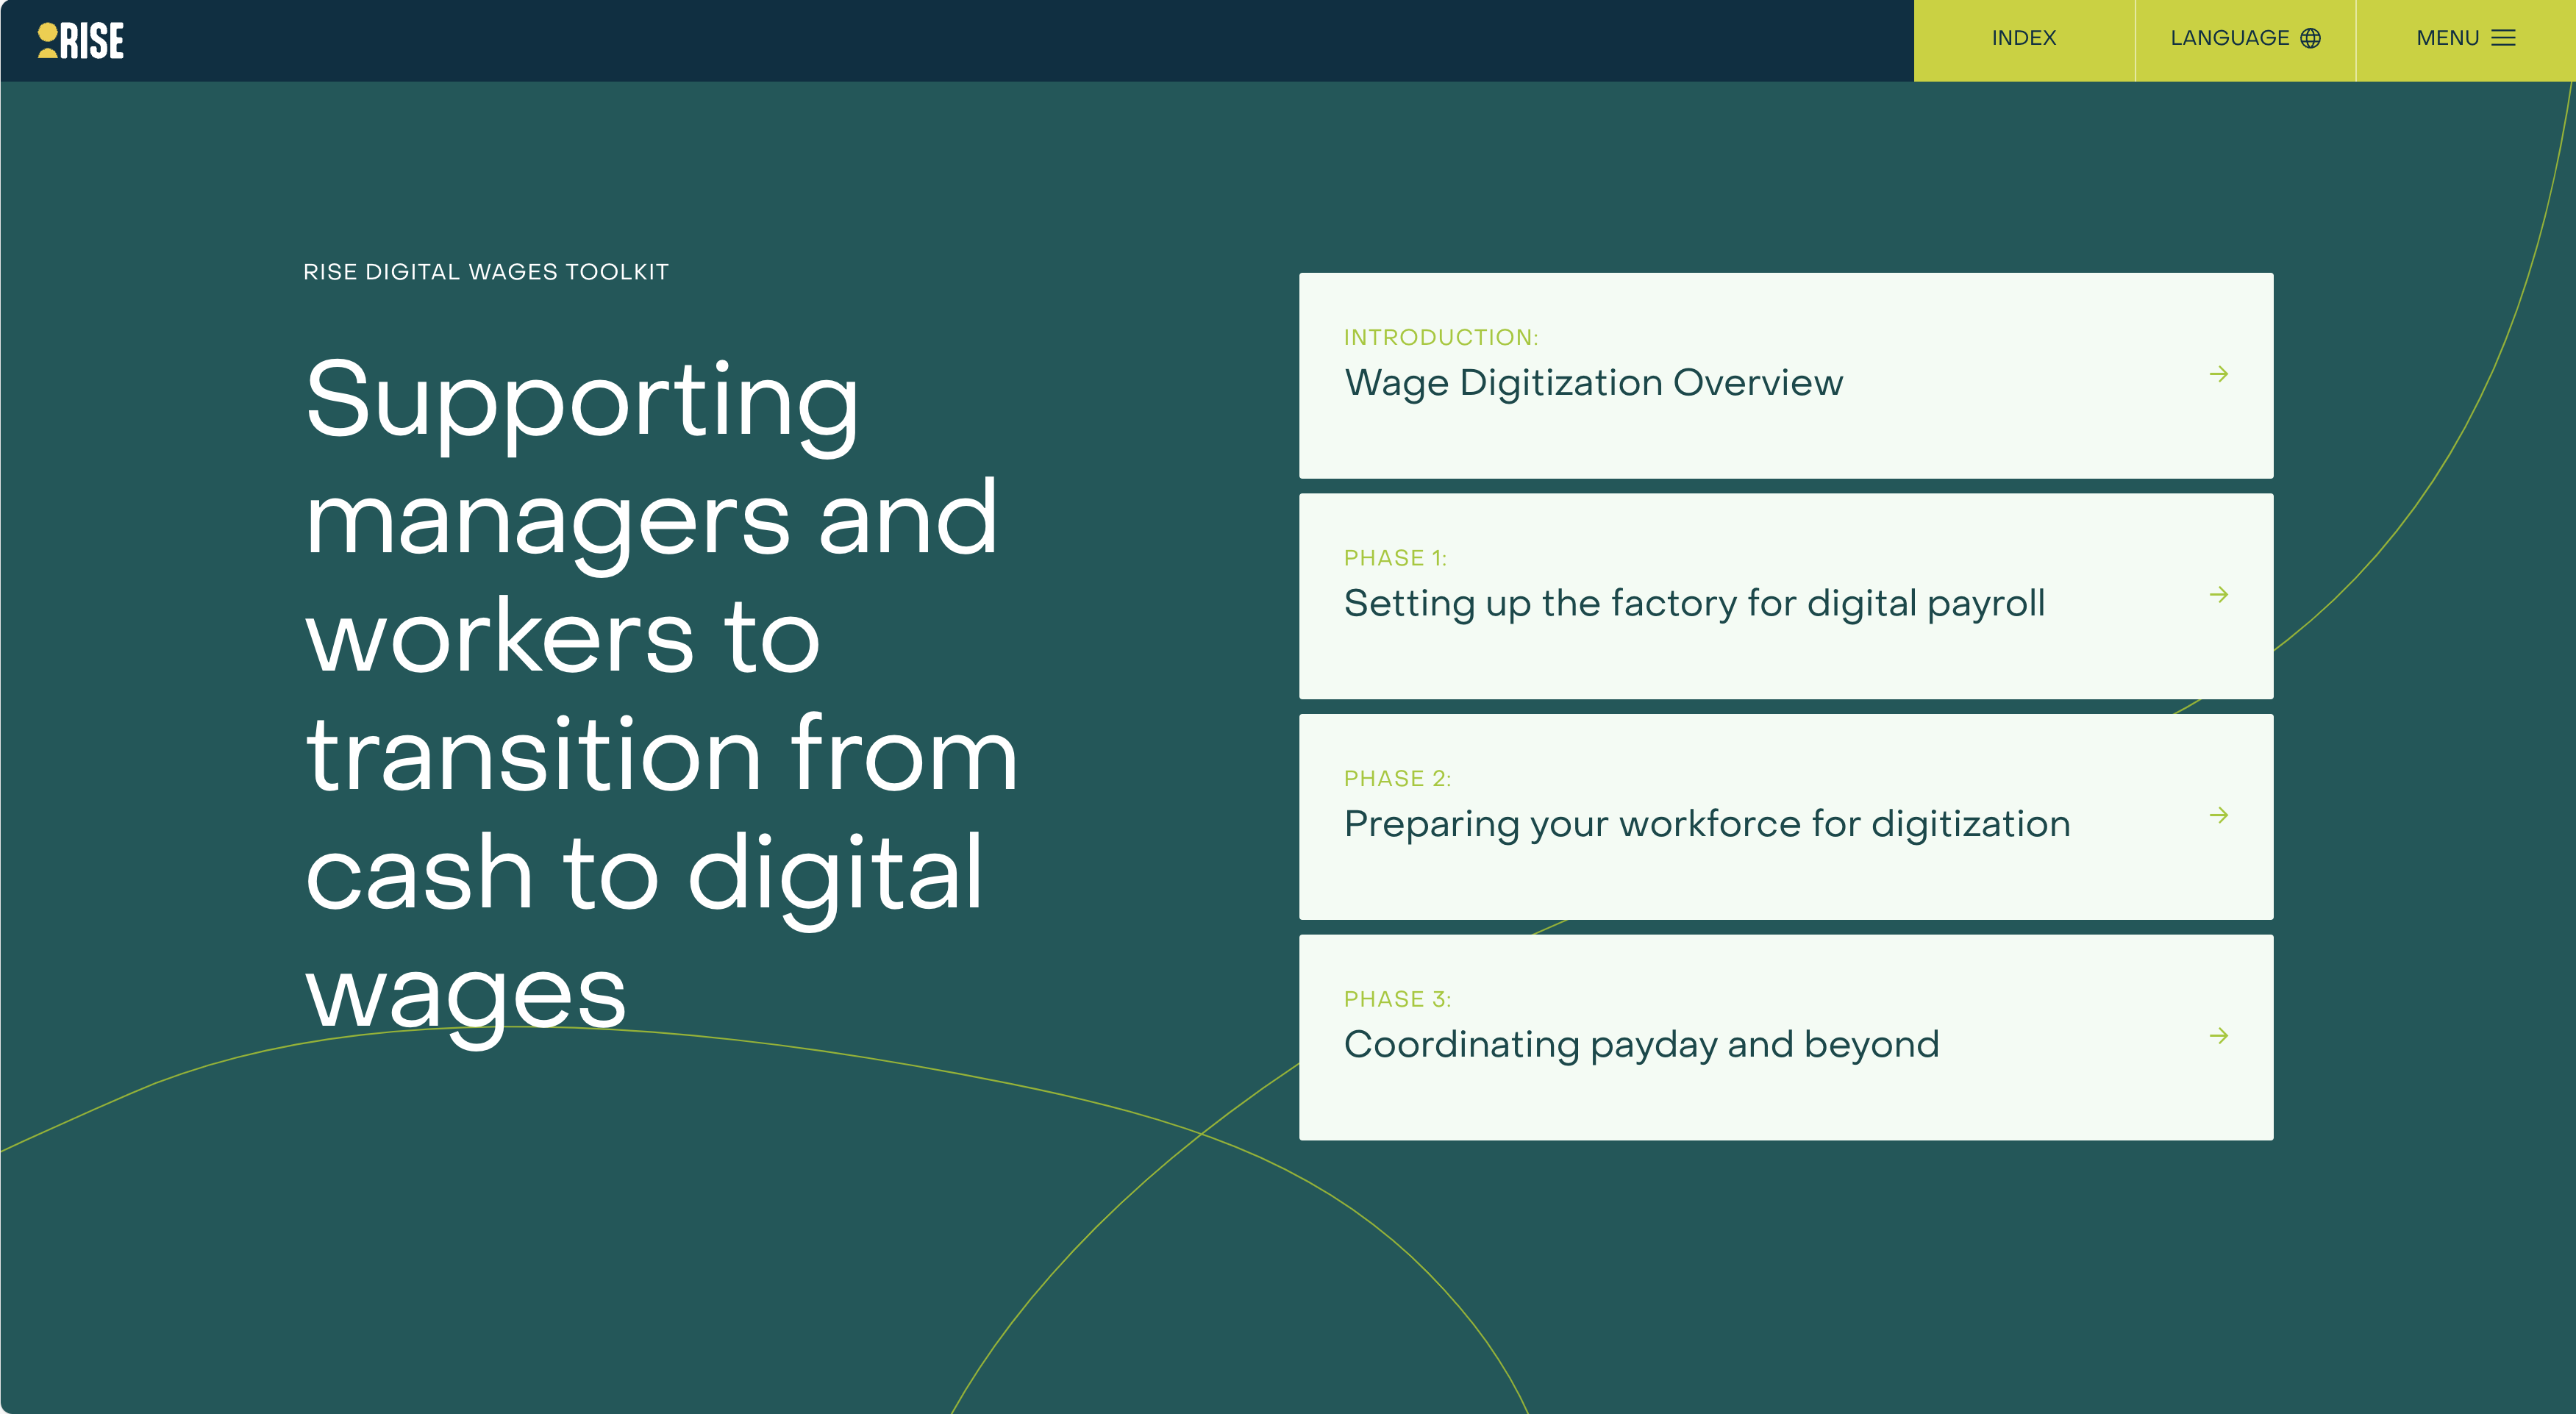 RISE Digital Wages Toolkit for Factory Managers Image